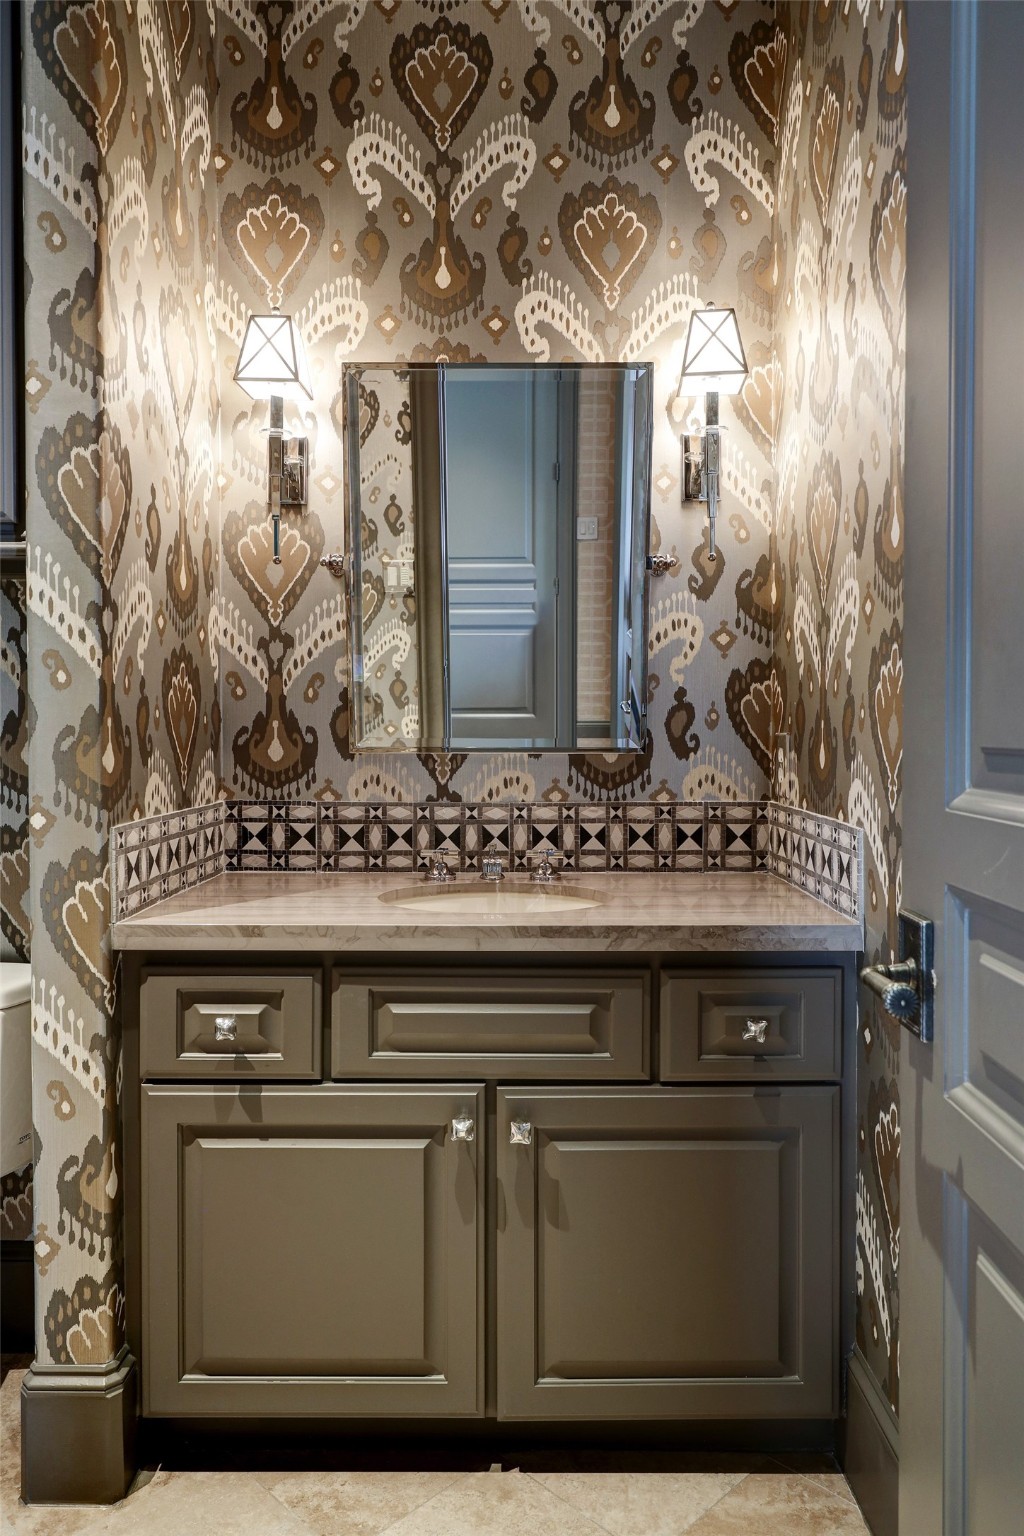 An elegantly appointed powder bathroom, though compact, boasts high-end fixtures and finishes, echoing the luxury of the adjoining spaces. Its strategic placement ensures that guests need not venture far, providing convenience especially during gatherings in the home office or movie marathons in the media room.